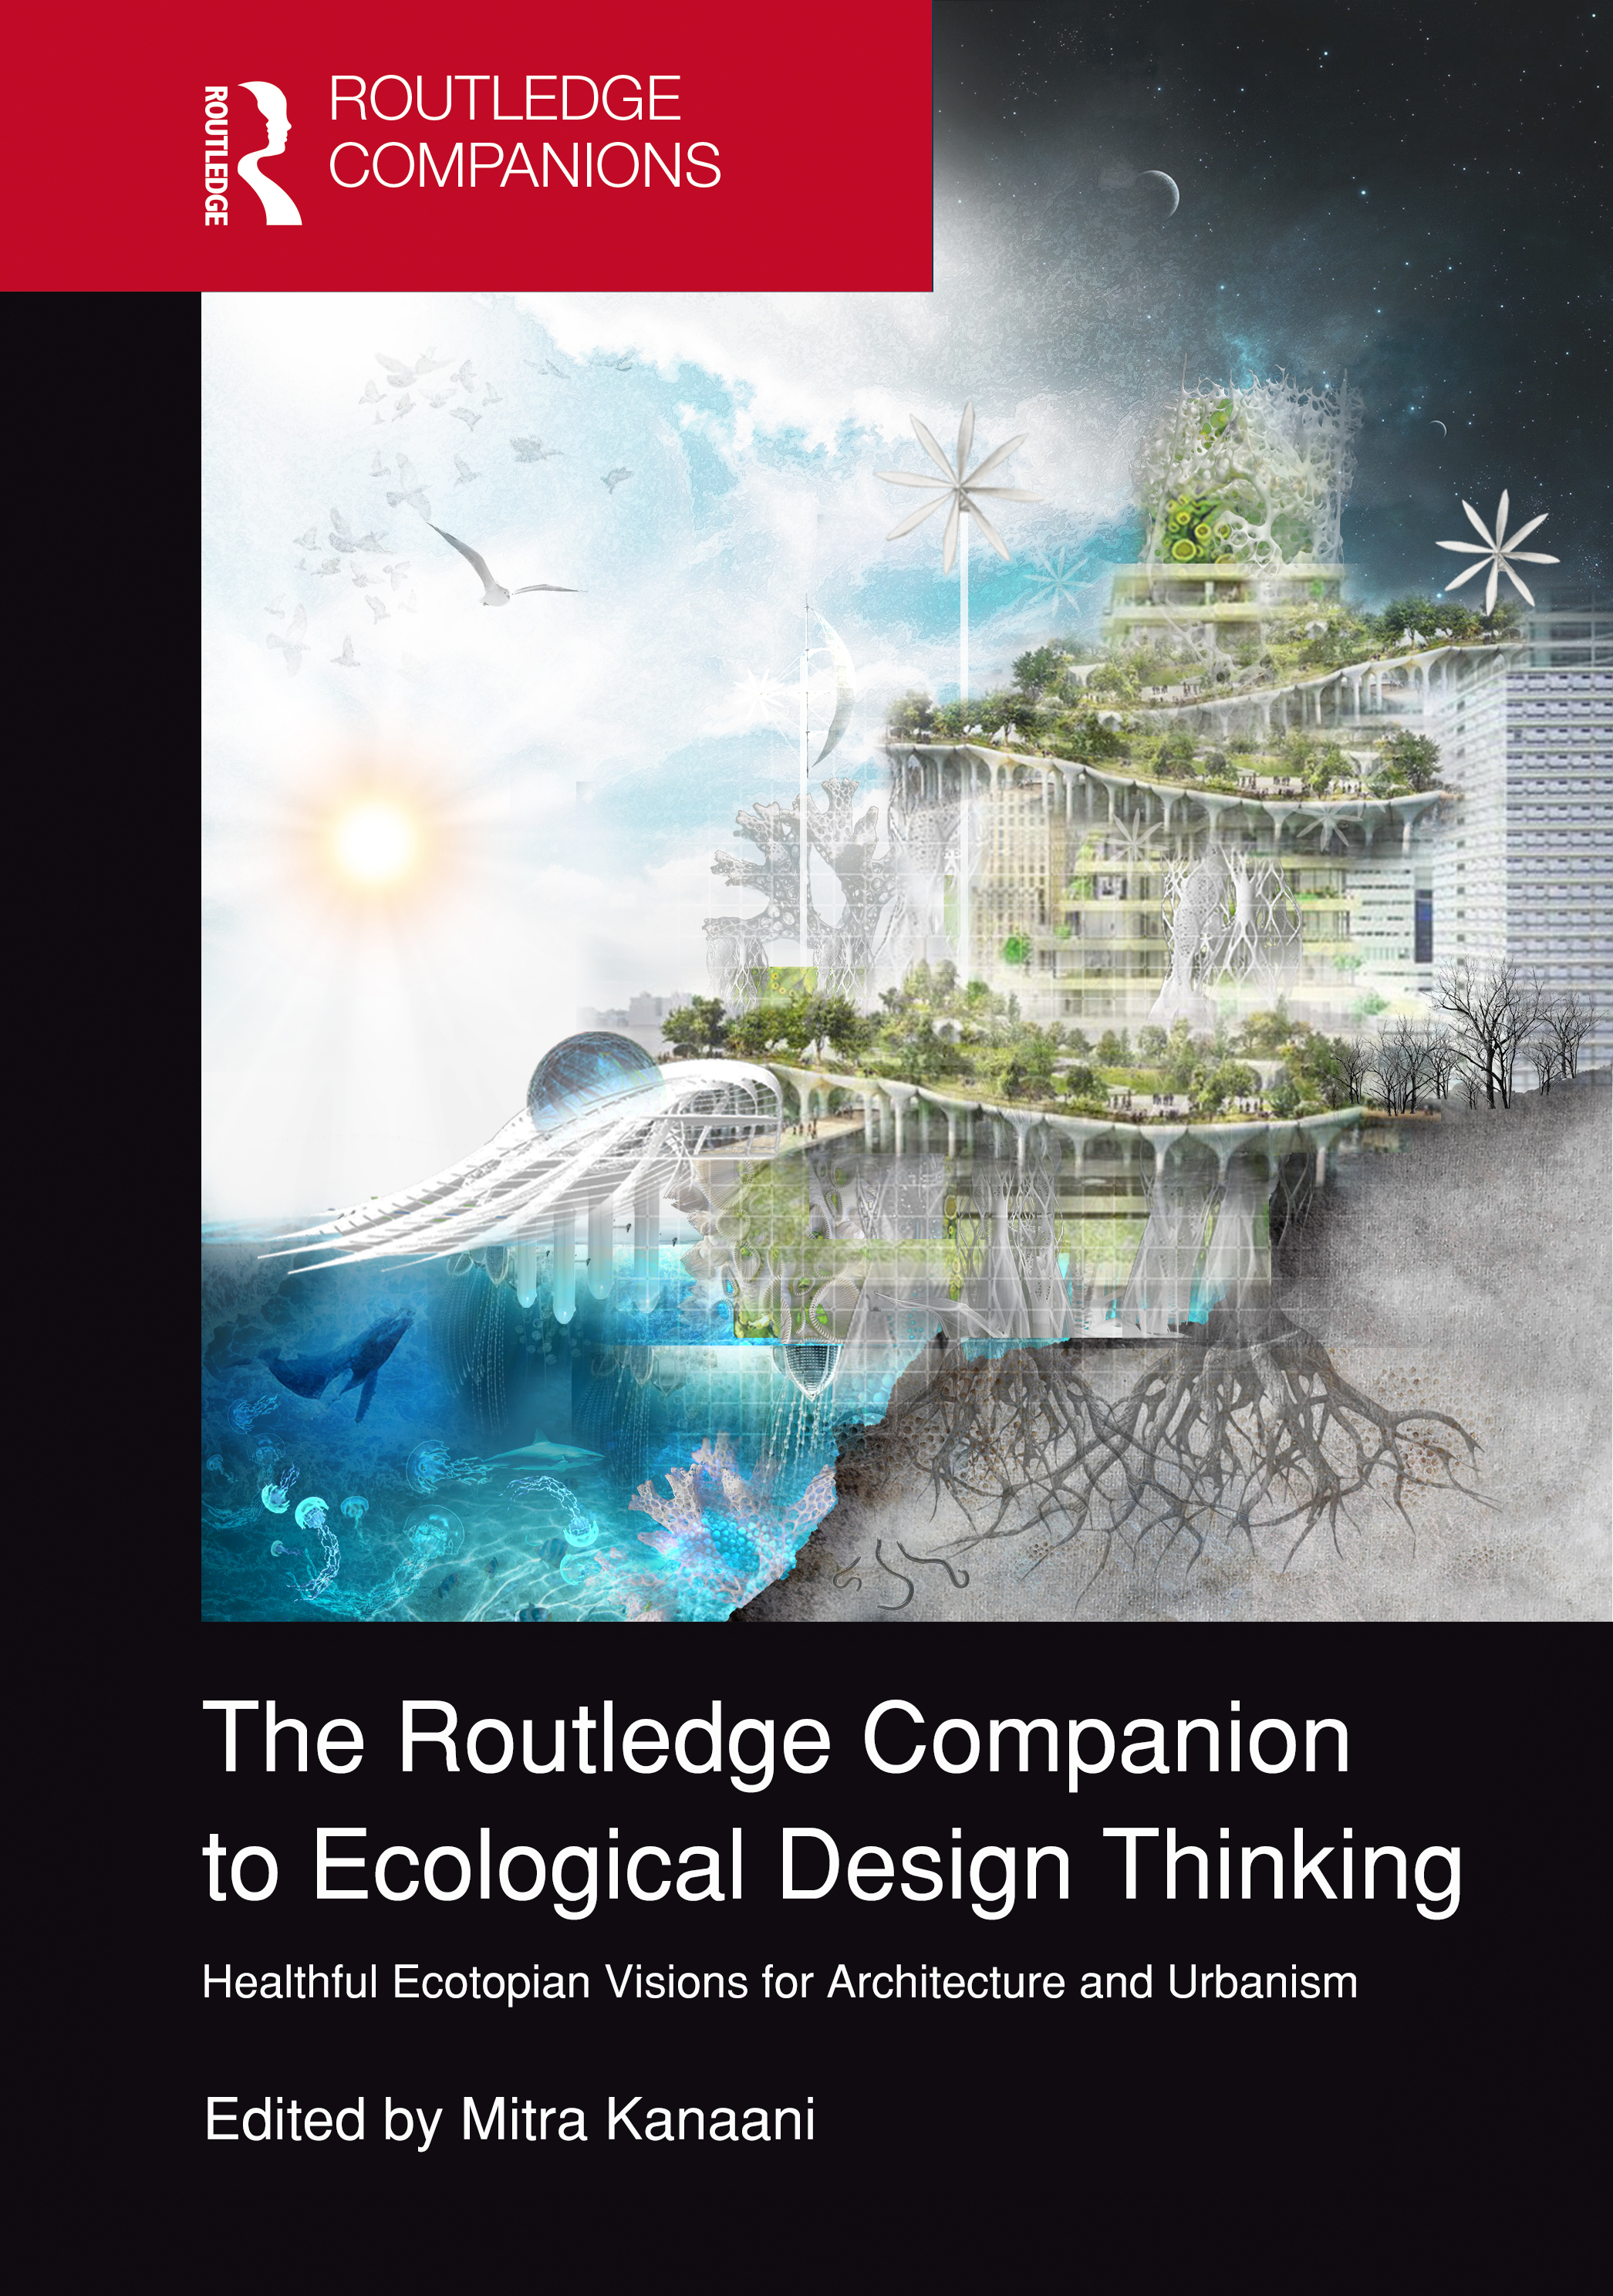 Tiliouine, O. and K. Pezzoli (2022) ‘Climate-Friendly Green Infrastructure planning and design: The promises, vulnerabilities and Remediation Design Practices for Environmental Contaminants’ in M. Kanaani (ed.) The Routledge Companion to Ecological Design Thinking, Healthful Ecotopian Visions for Architecture and Urbanism, Oxford: Routledge.